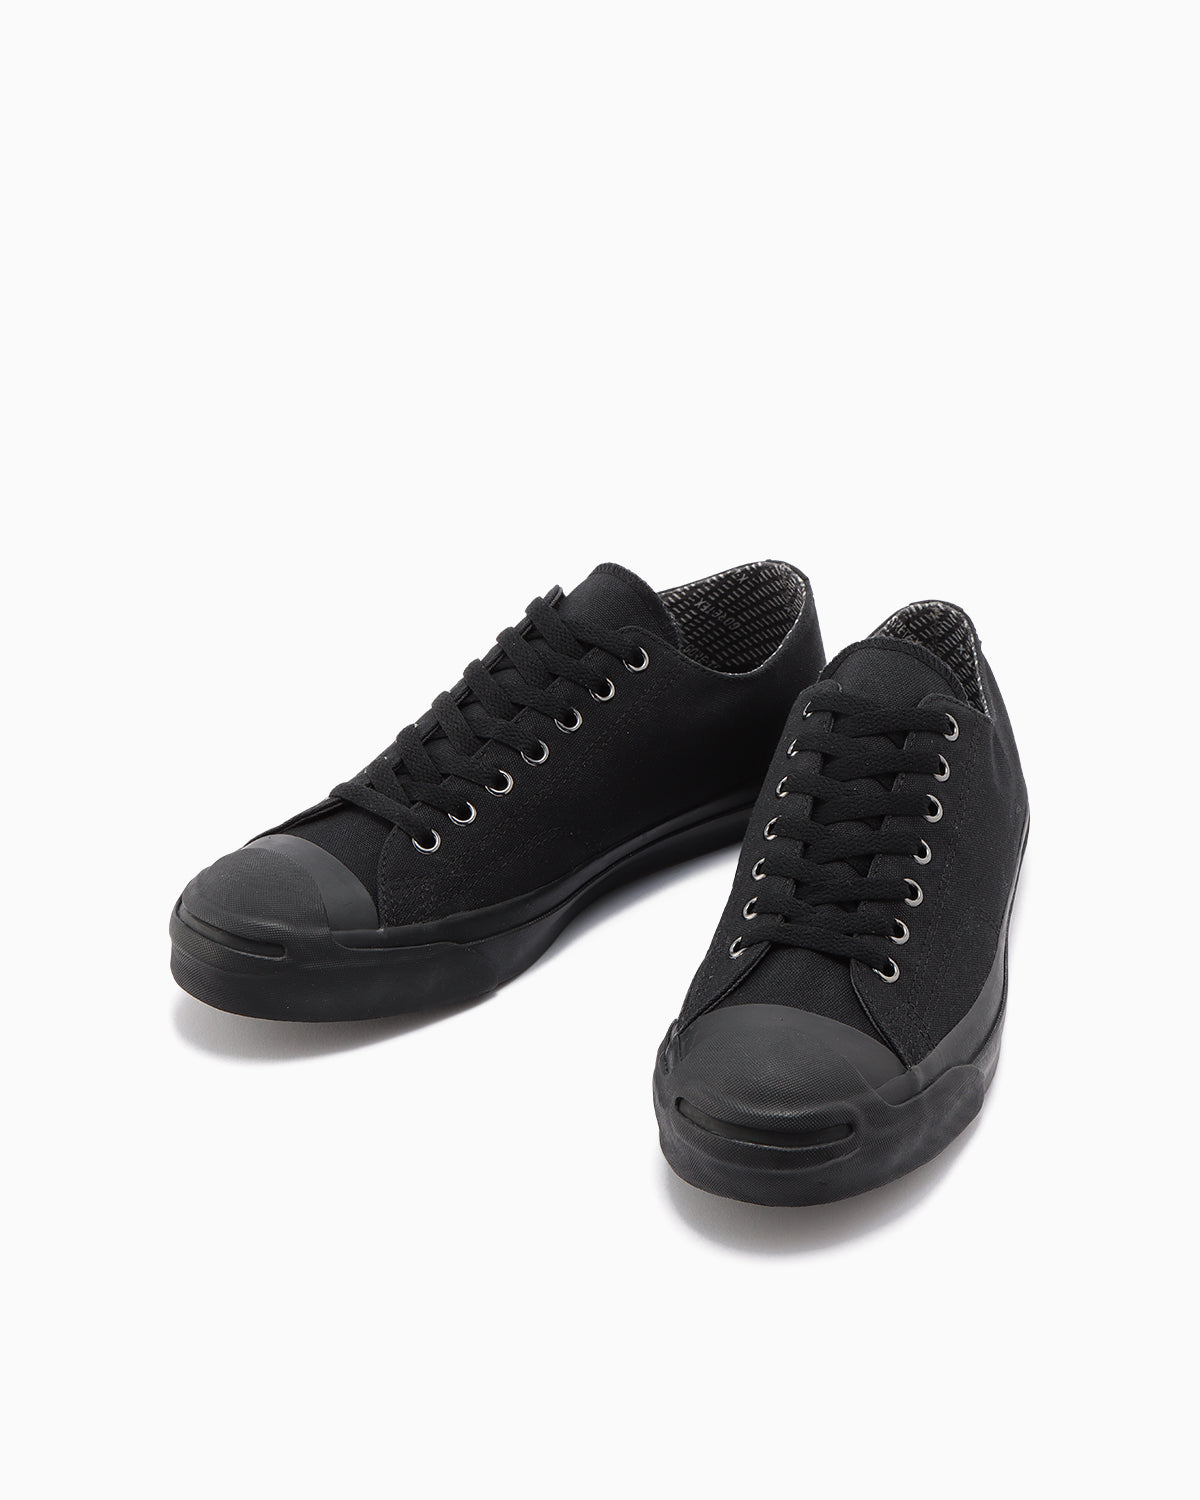 JACK PURCELL GORE-TEX RH